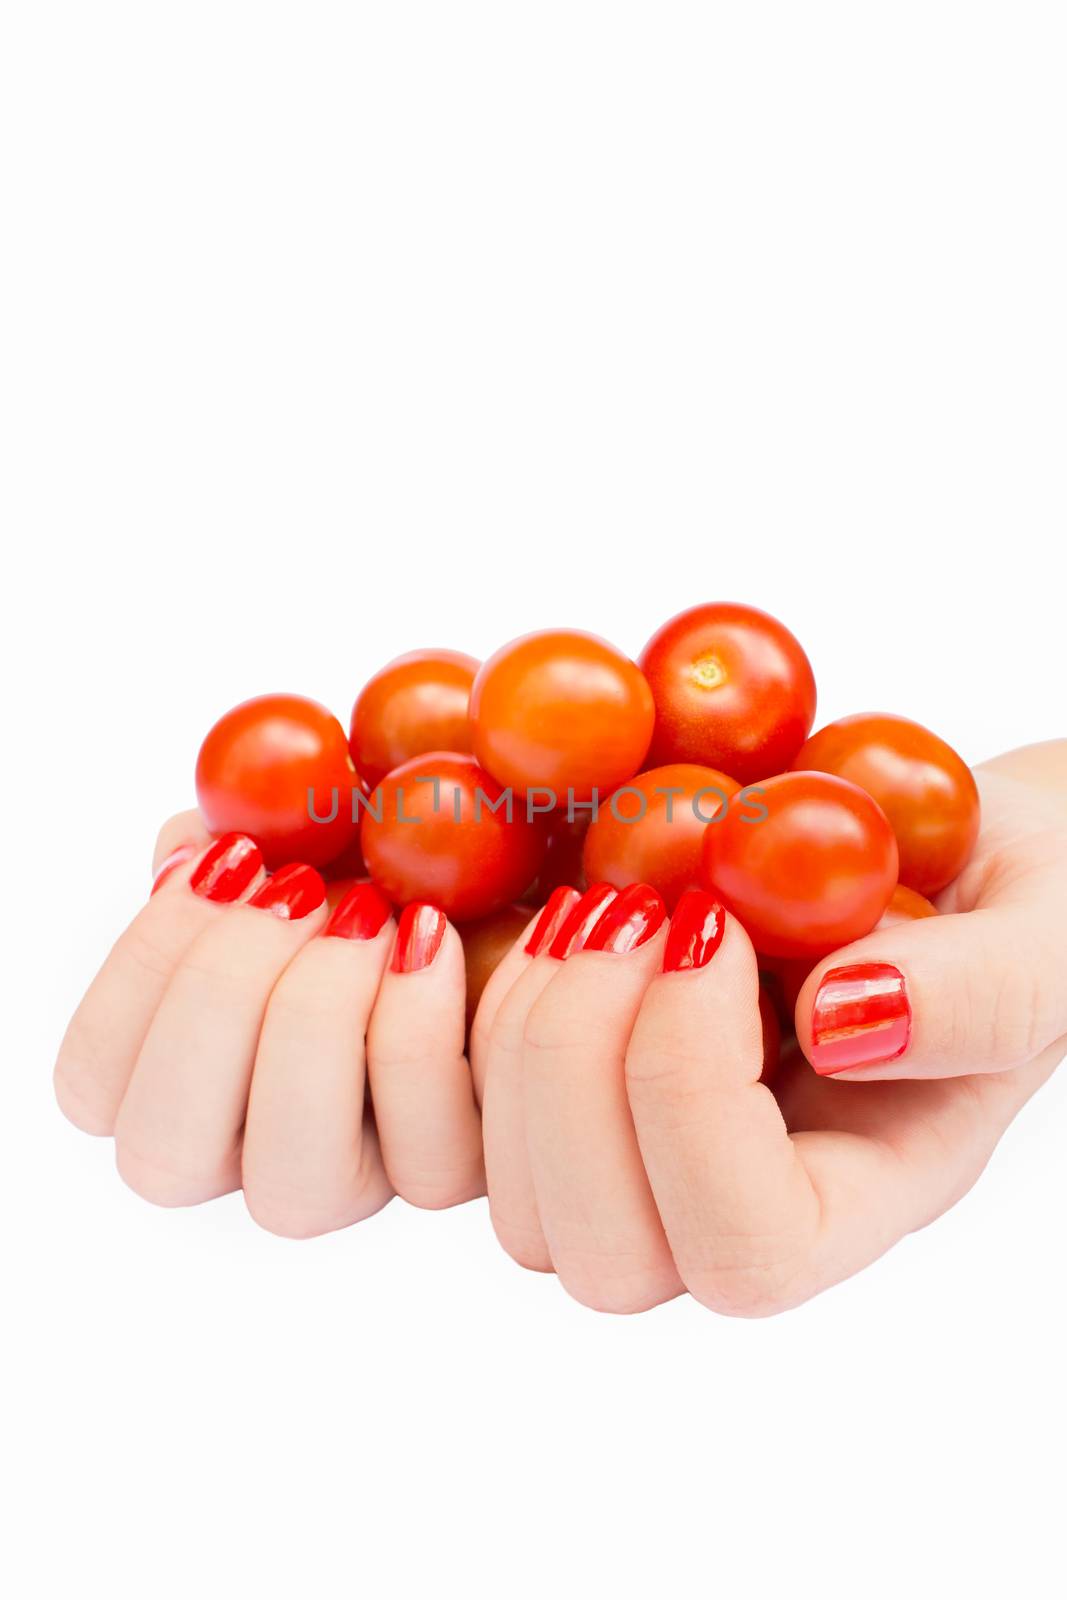 Two hands holding cherry tomatoes isolated on white background